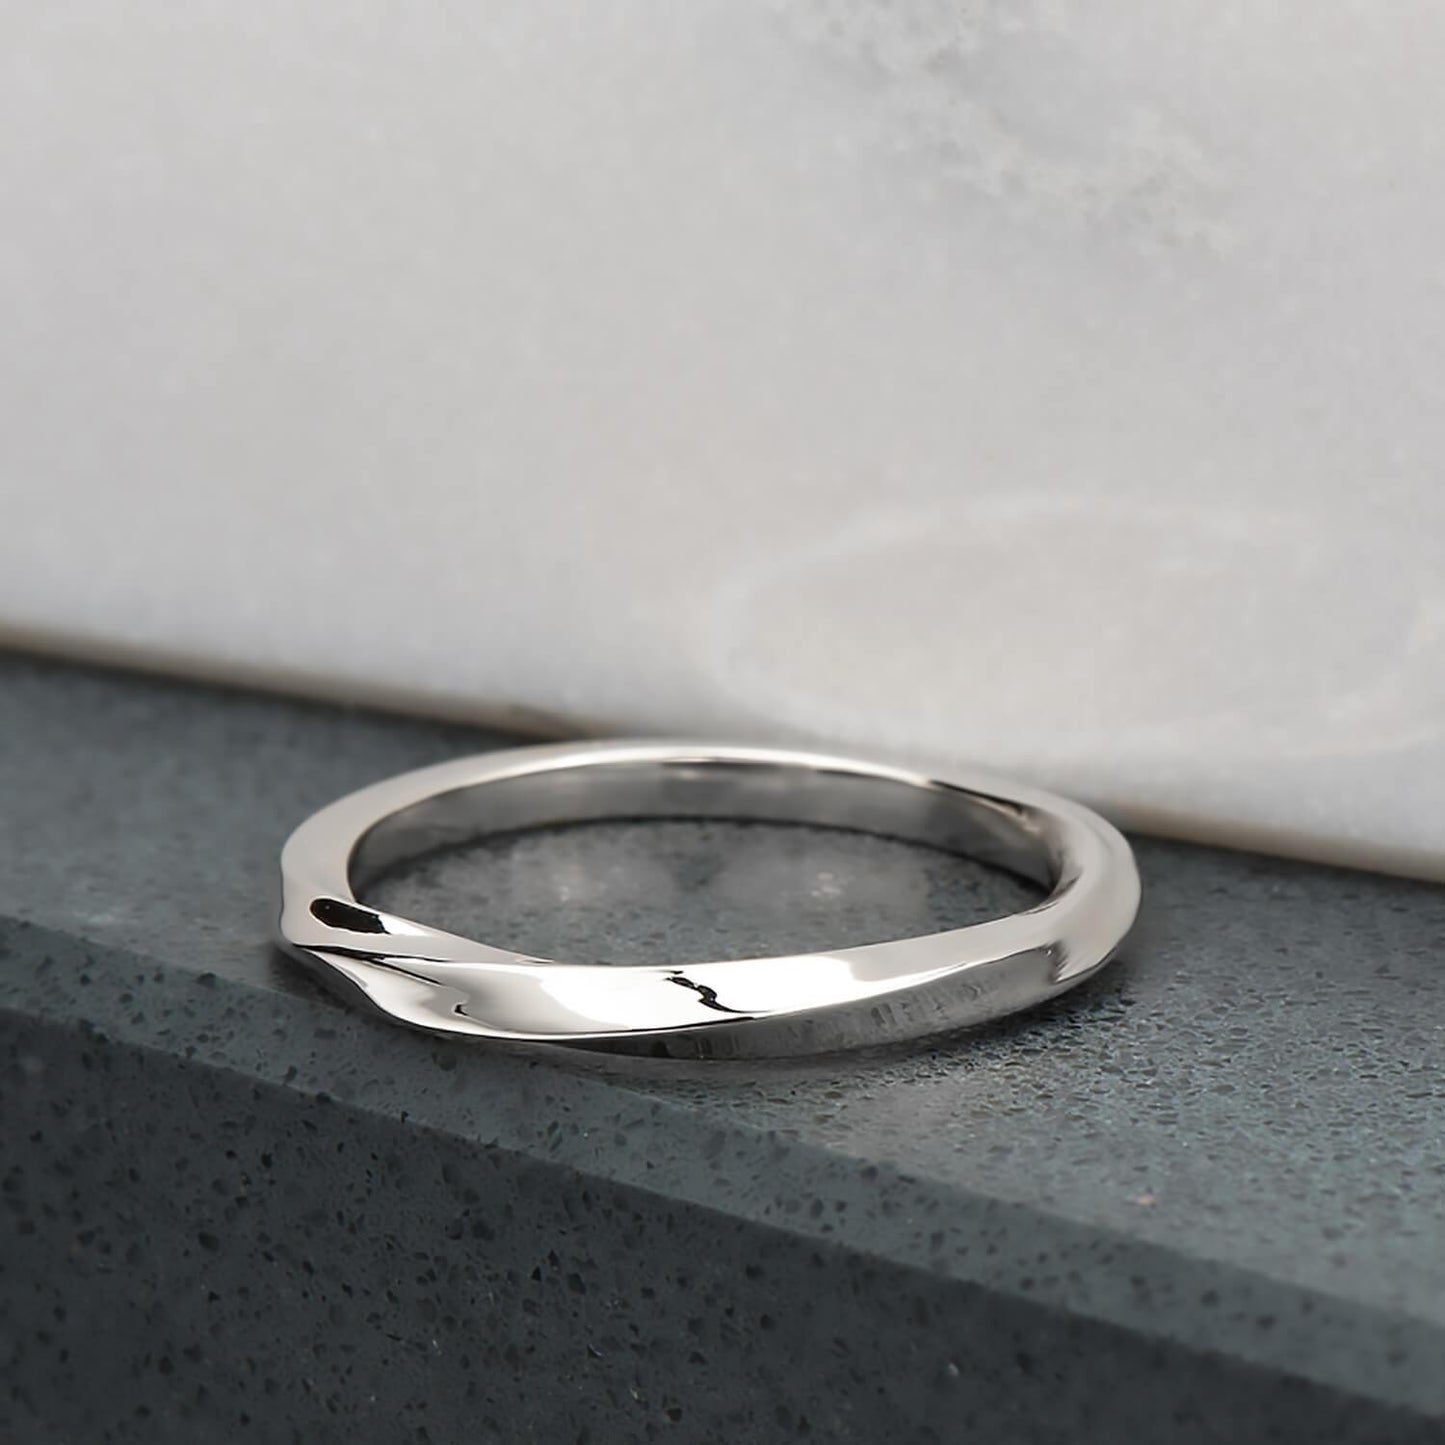 Recycled sterling silver with a half twist, the ring is 2mm in its width & thickness. It has been finished with a high mirror polish.